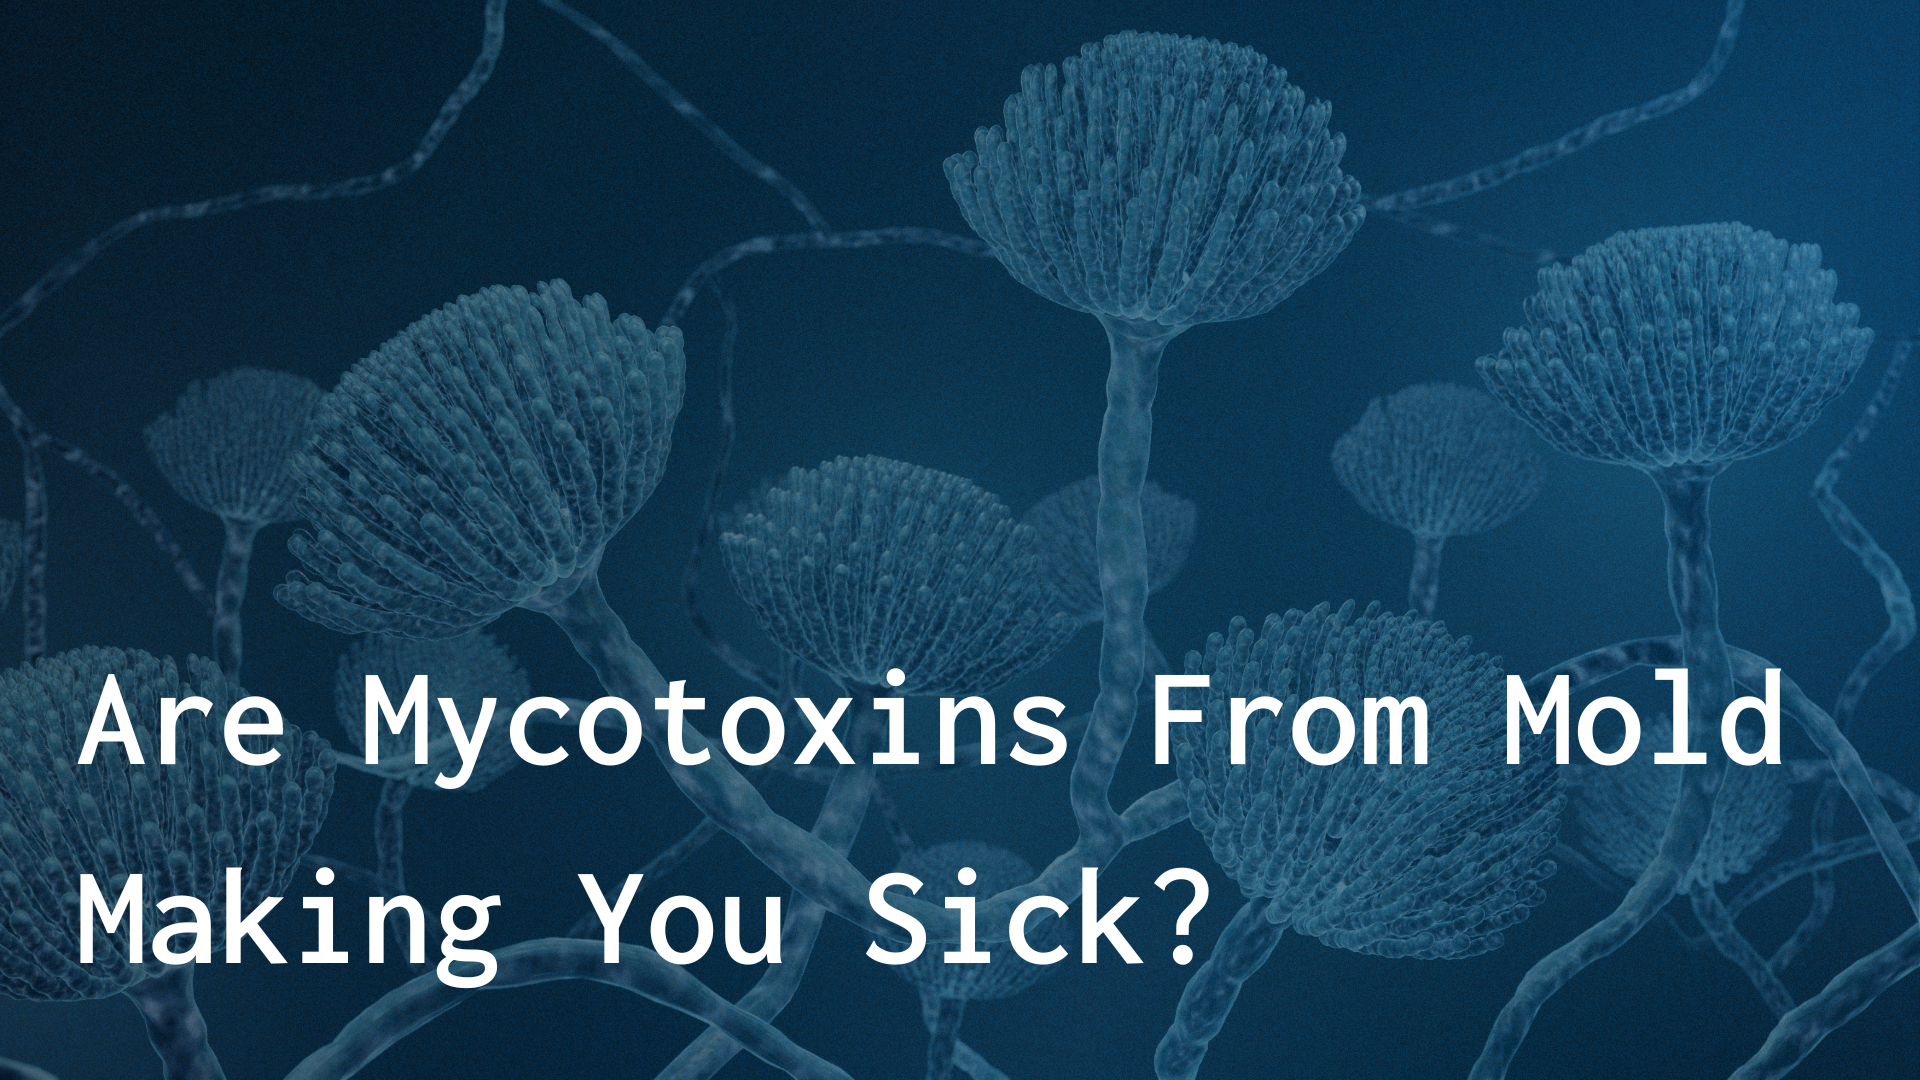 Are Mycotoxins from molds making you sick?